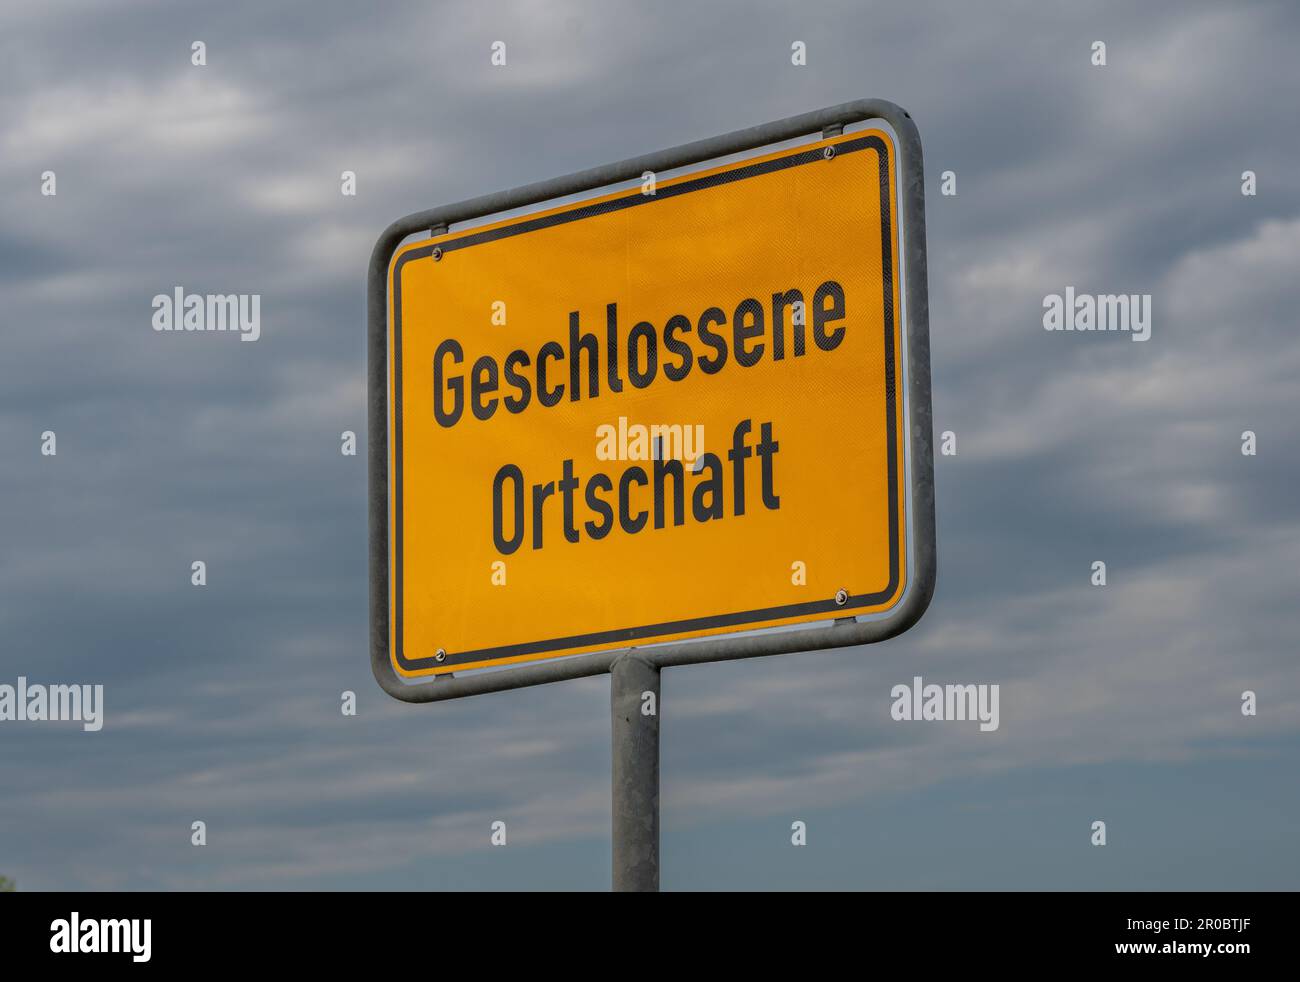 City entrance sign on a road in Germany with the text 'geschlossene Ortschaft' (built-up area). Stock Photo